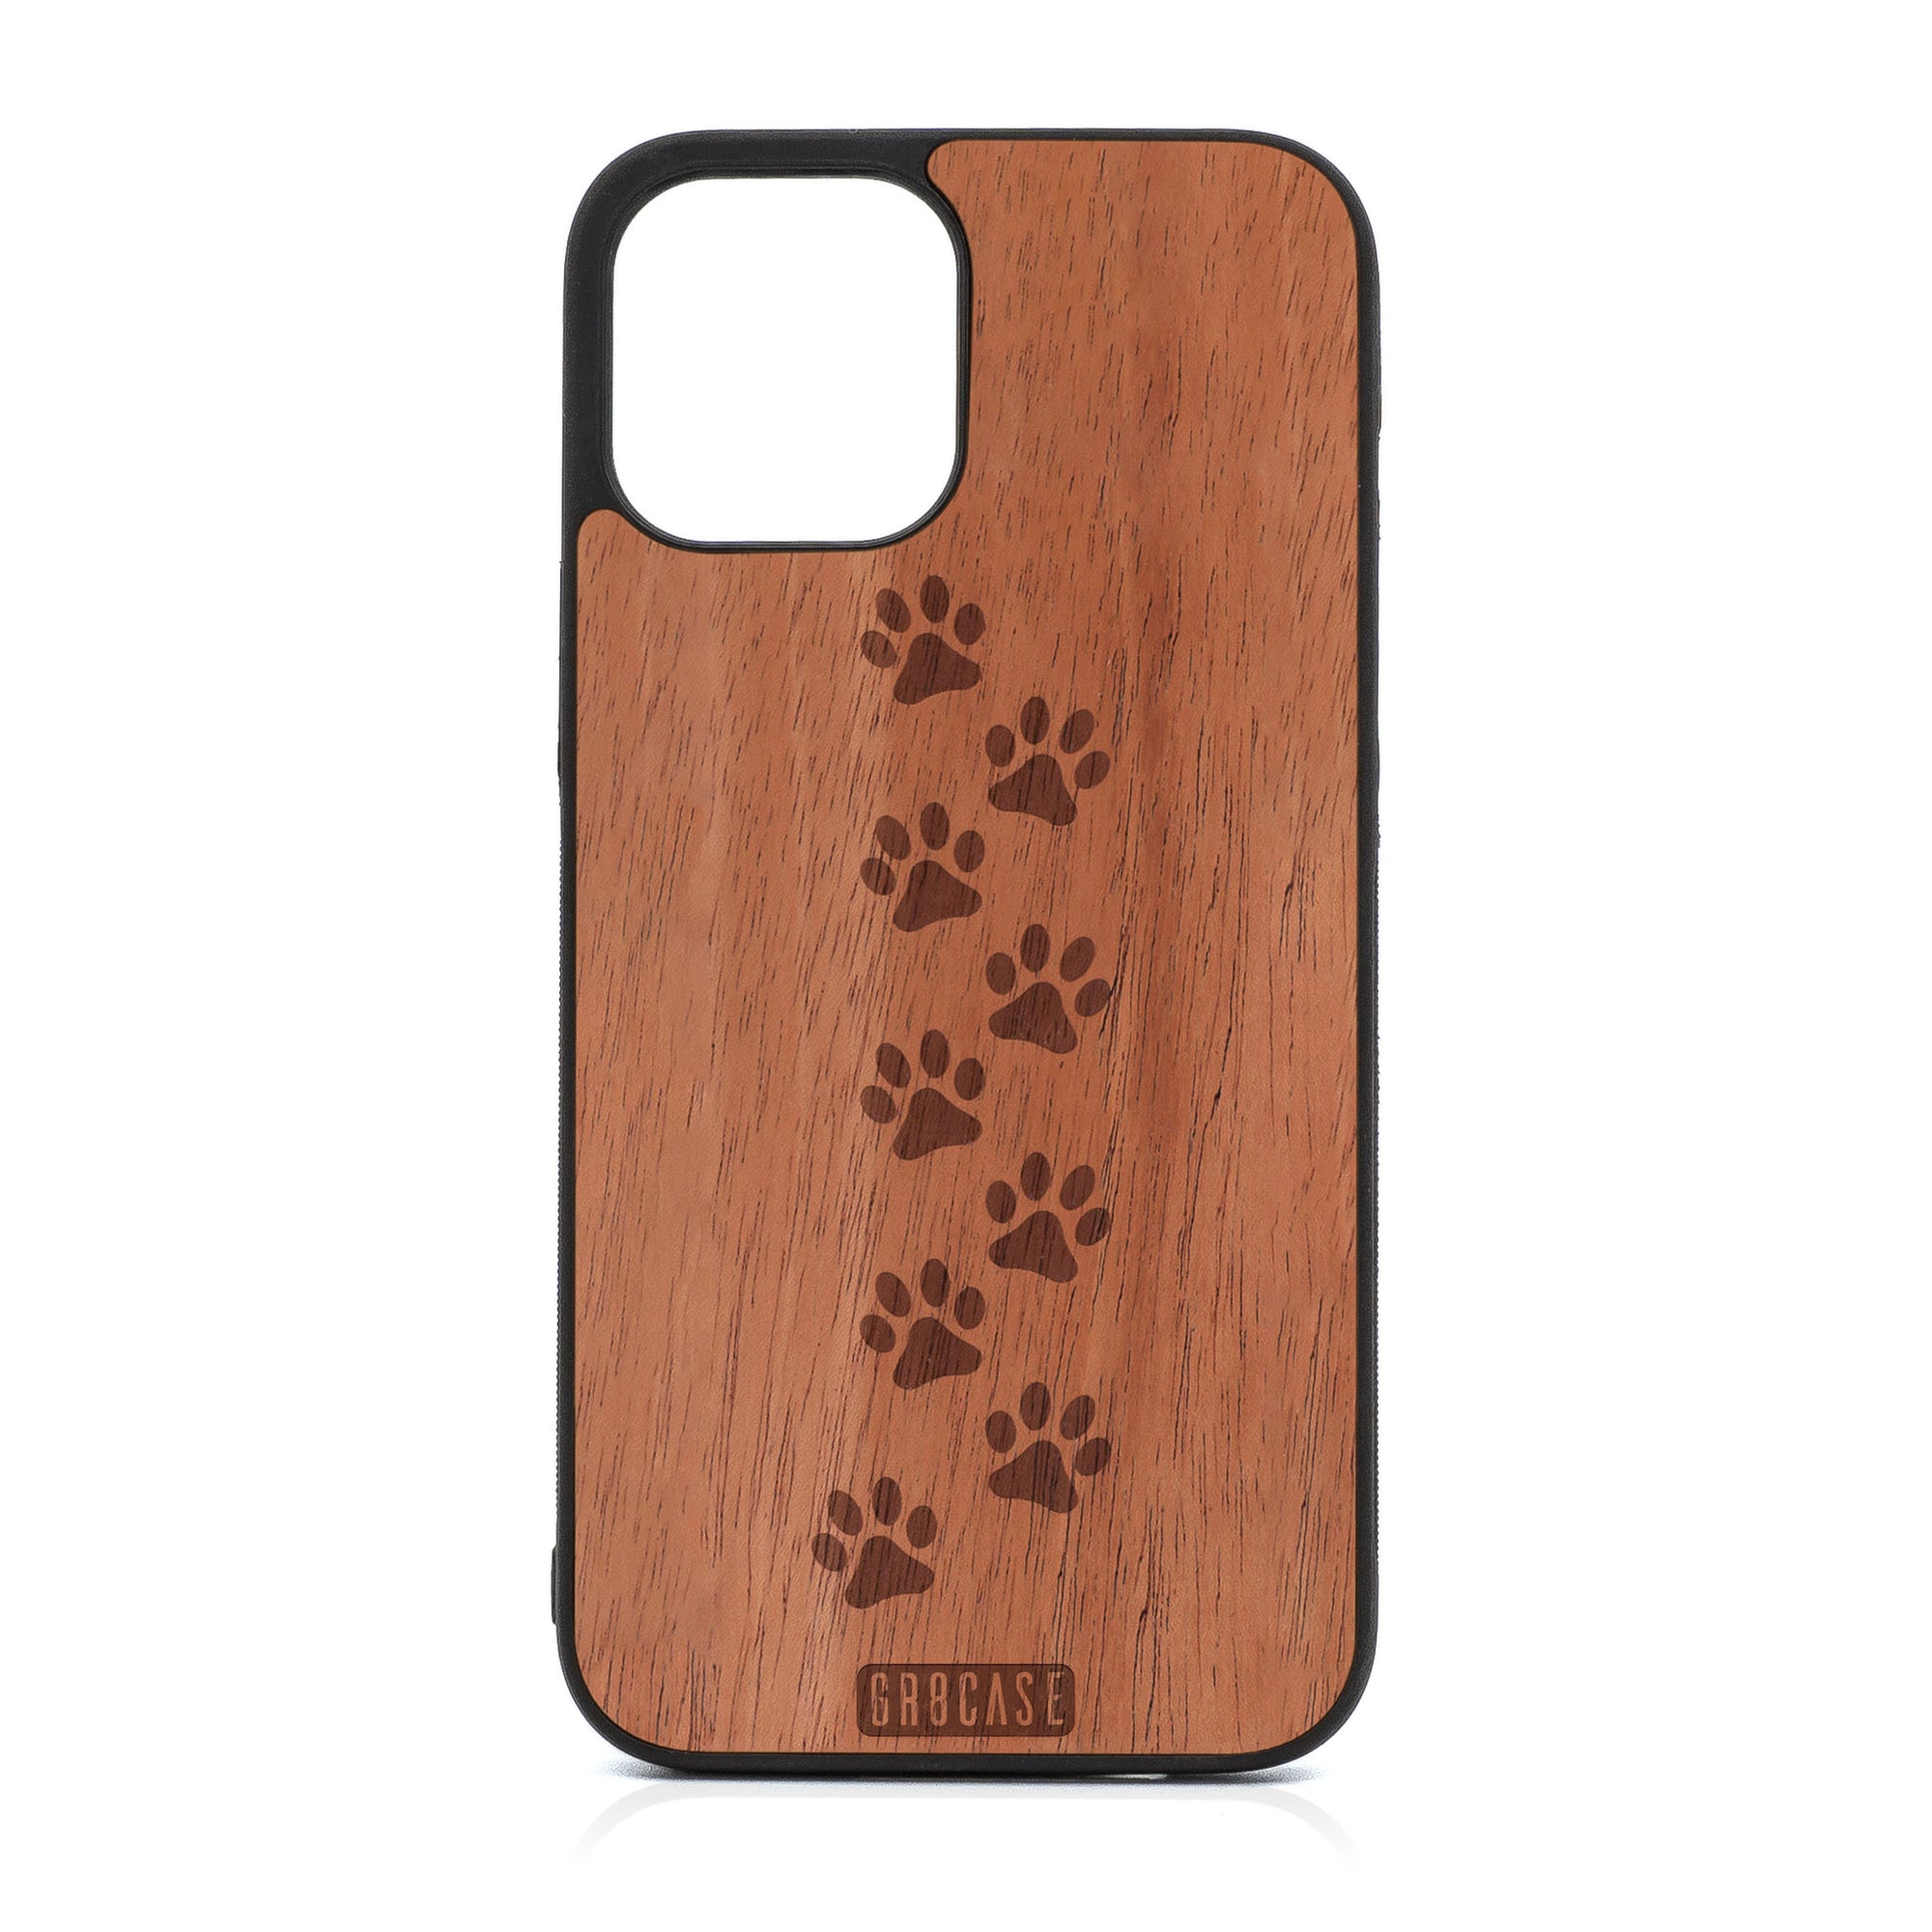 Paw Prints Design Wood Case For iPhone 12 Pro Max